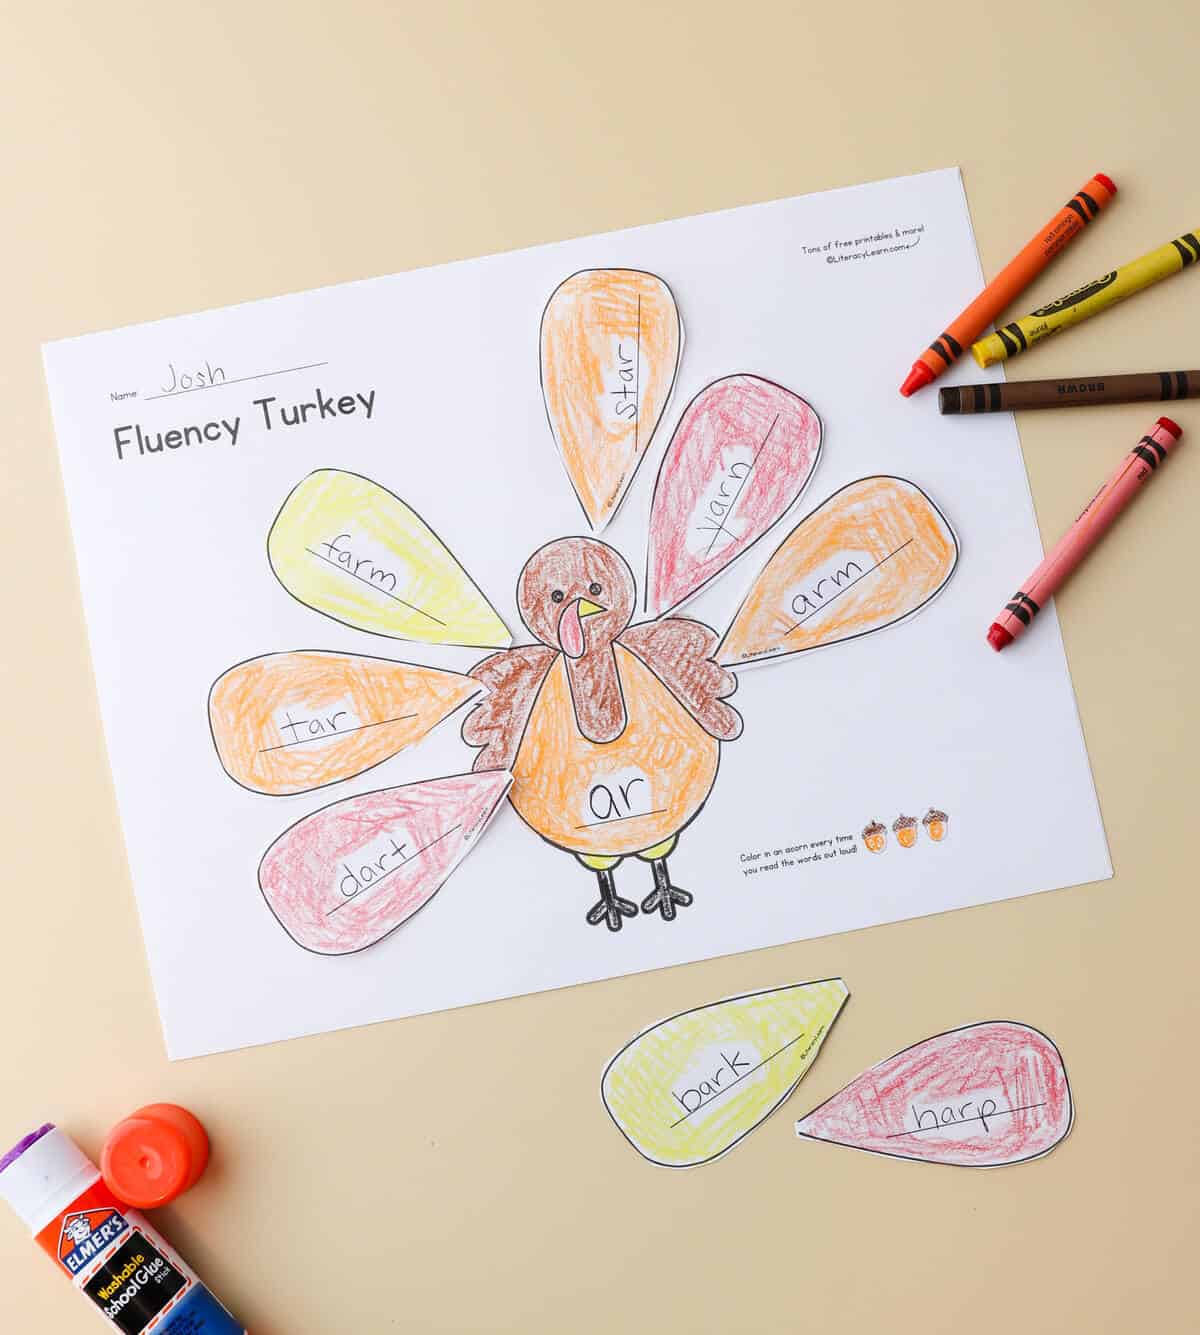 The printed fluency worksheet with "ar" fluency skill and crayons and a glue stick. 